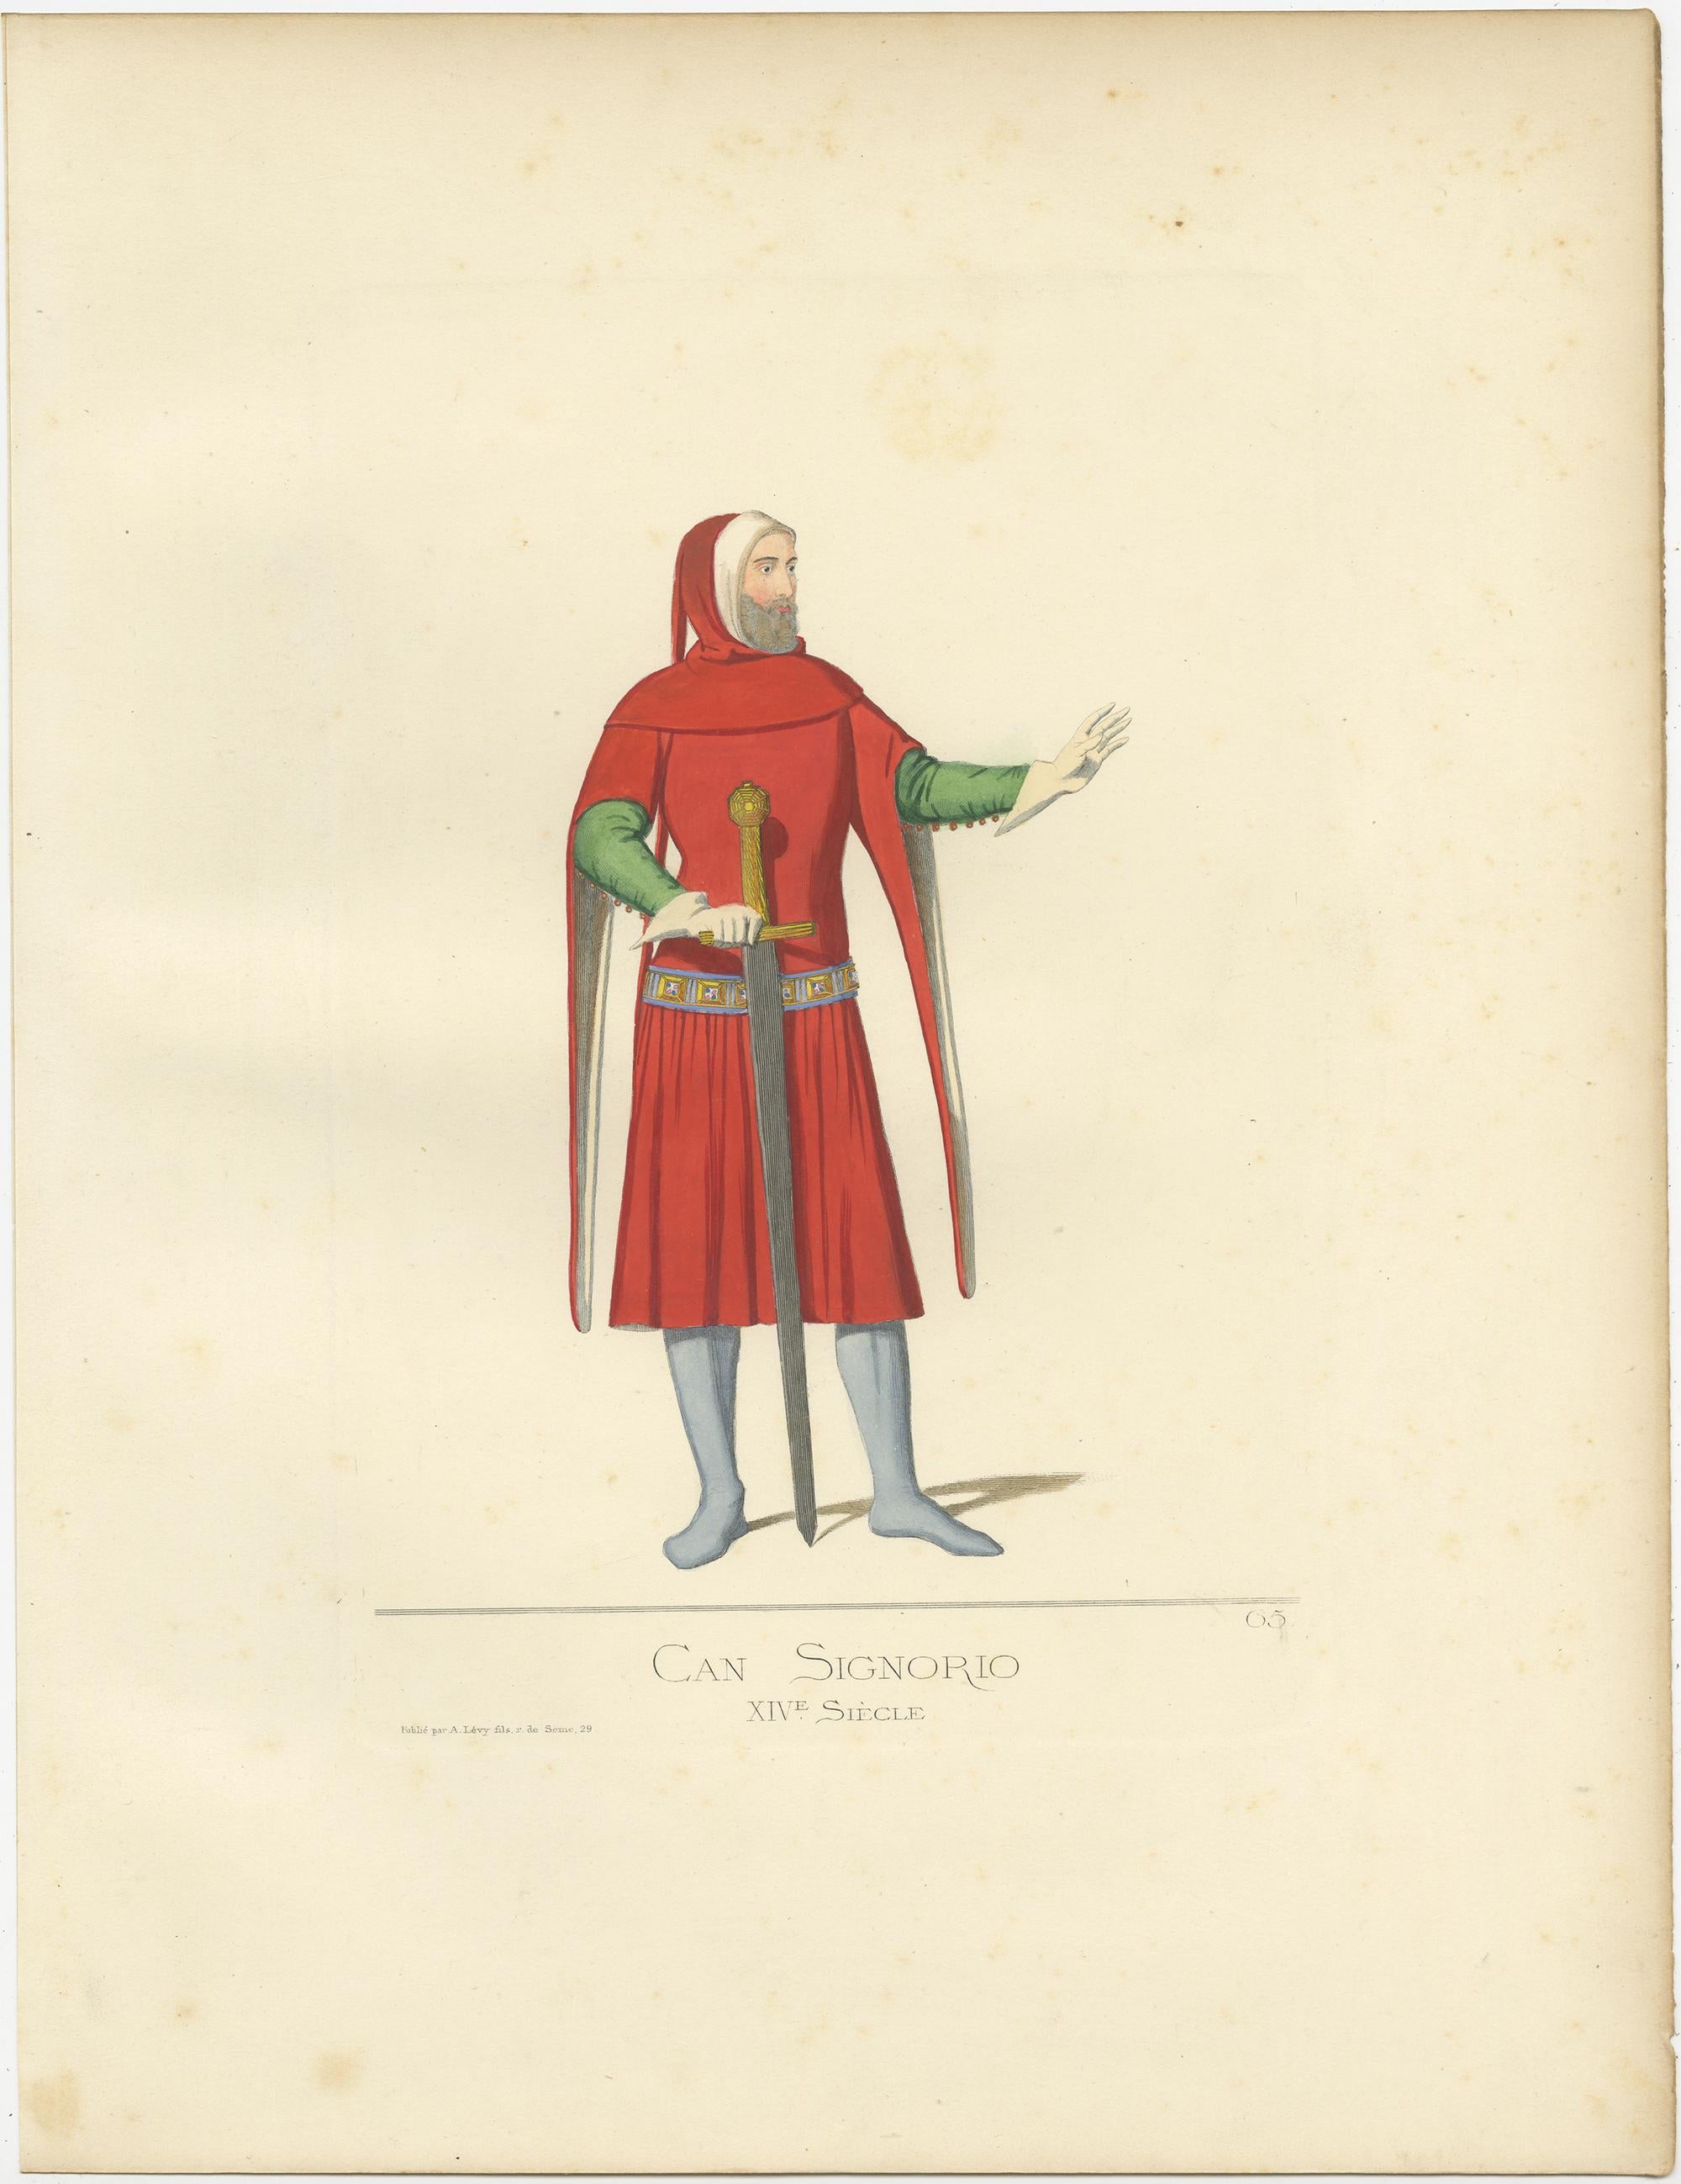 Antique print titled ‘Can Signorio, XIVe Siecle.’ Original antique print of Cansignorio Della Scala, a Lord of Verona, Italy, 14th century. This print originates from 'Costumes historiques de femmes du XIII, XIV et XV siècle' by C. Bonnard.